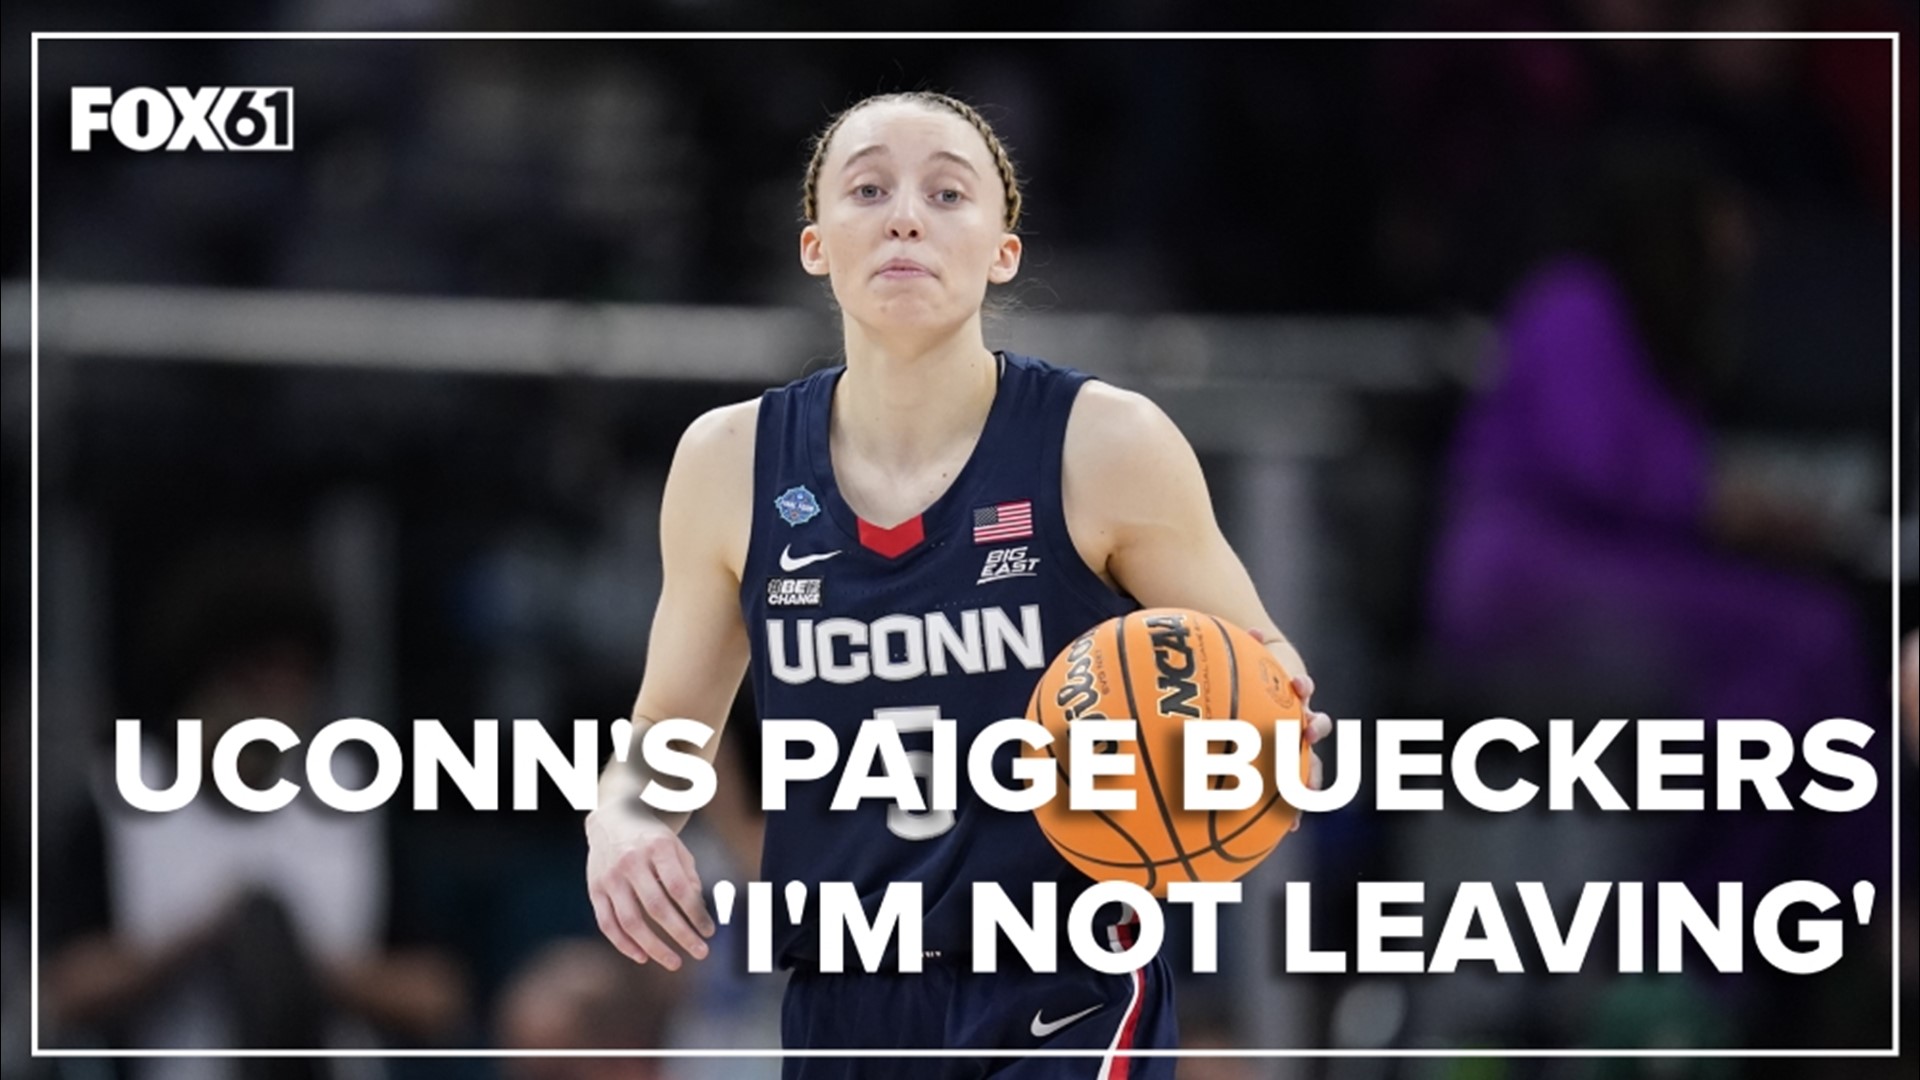 About a month ago, Paige Bueckers suffered a torn ACL during a basketball game, leading to her absence from the upcoming season.